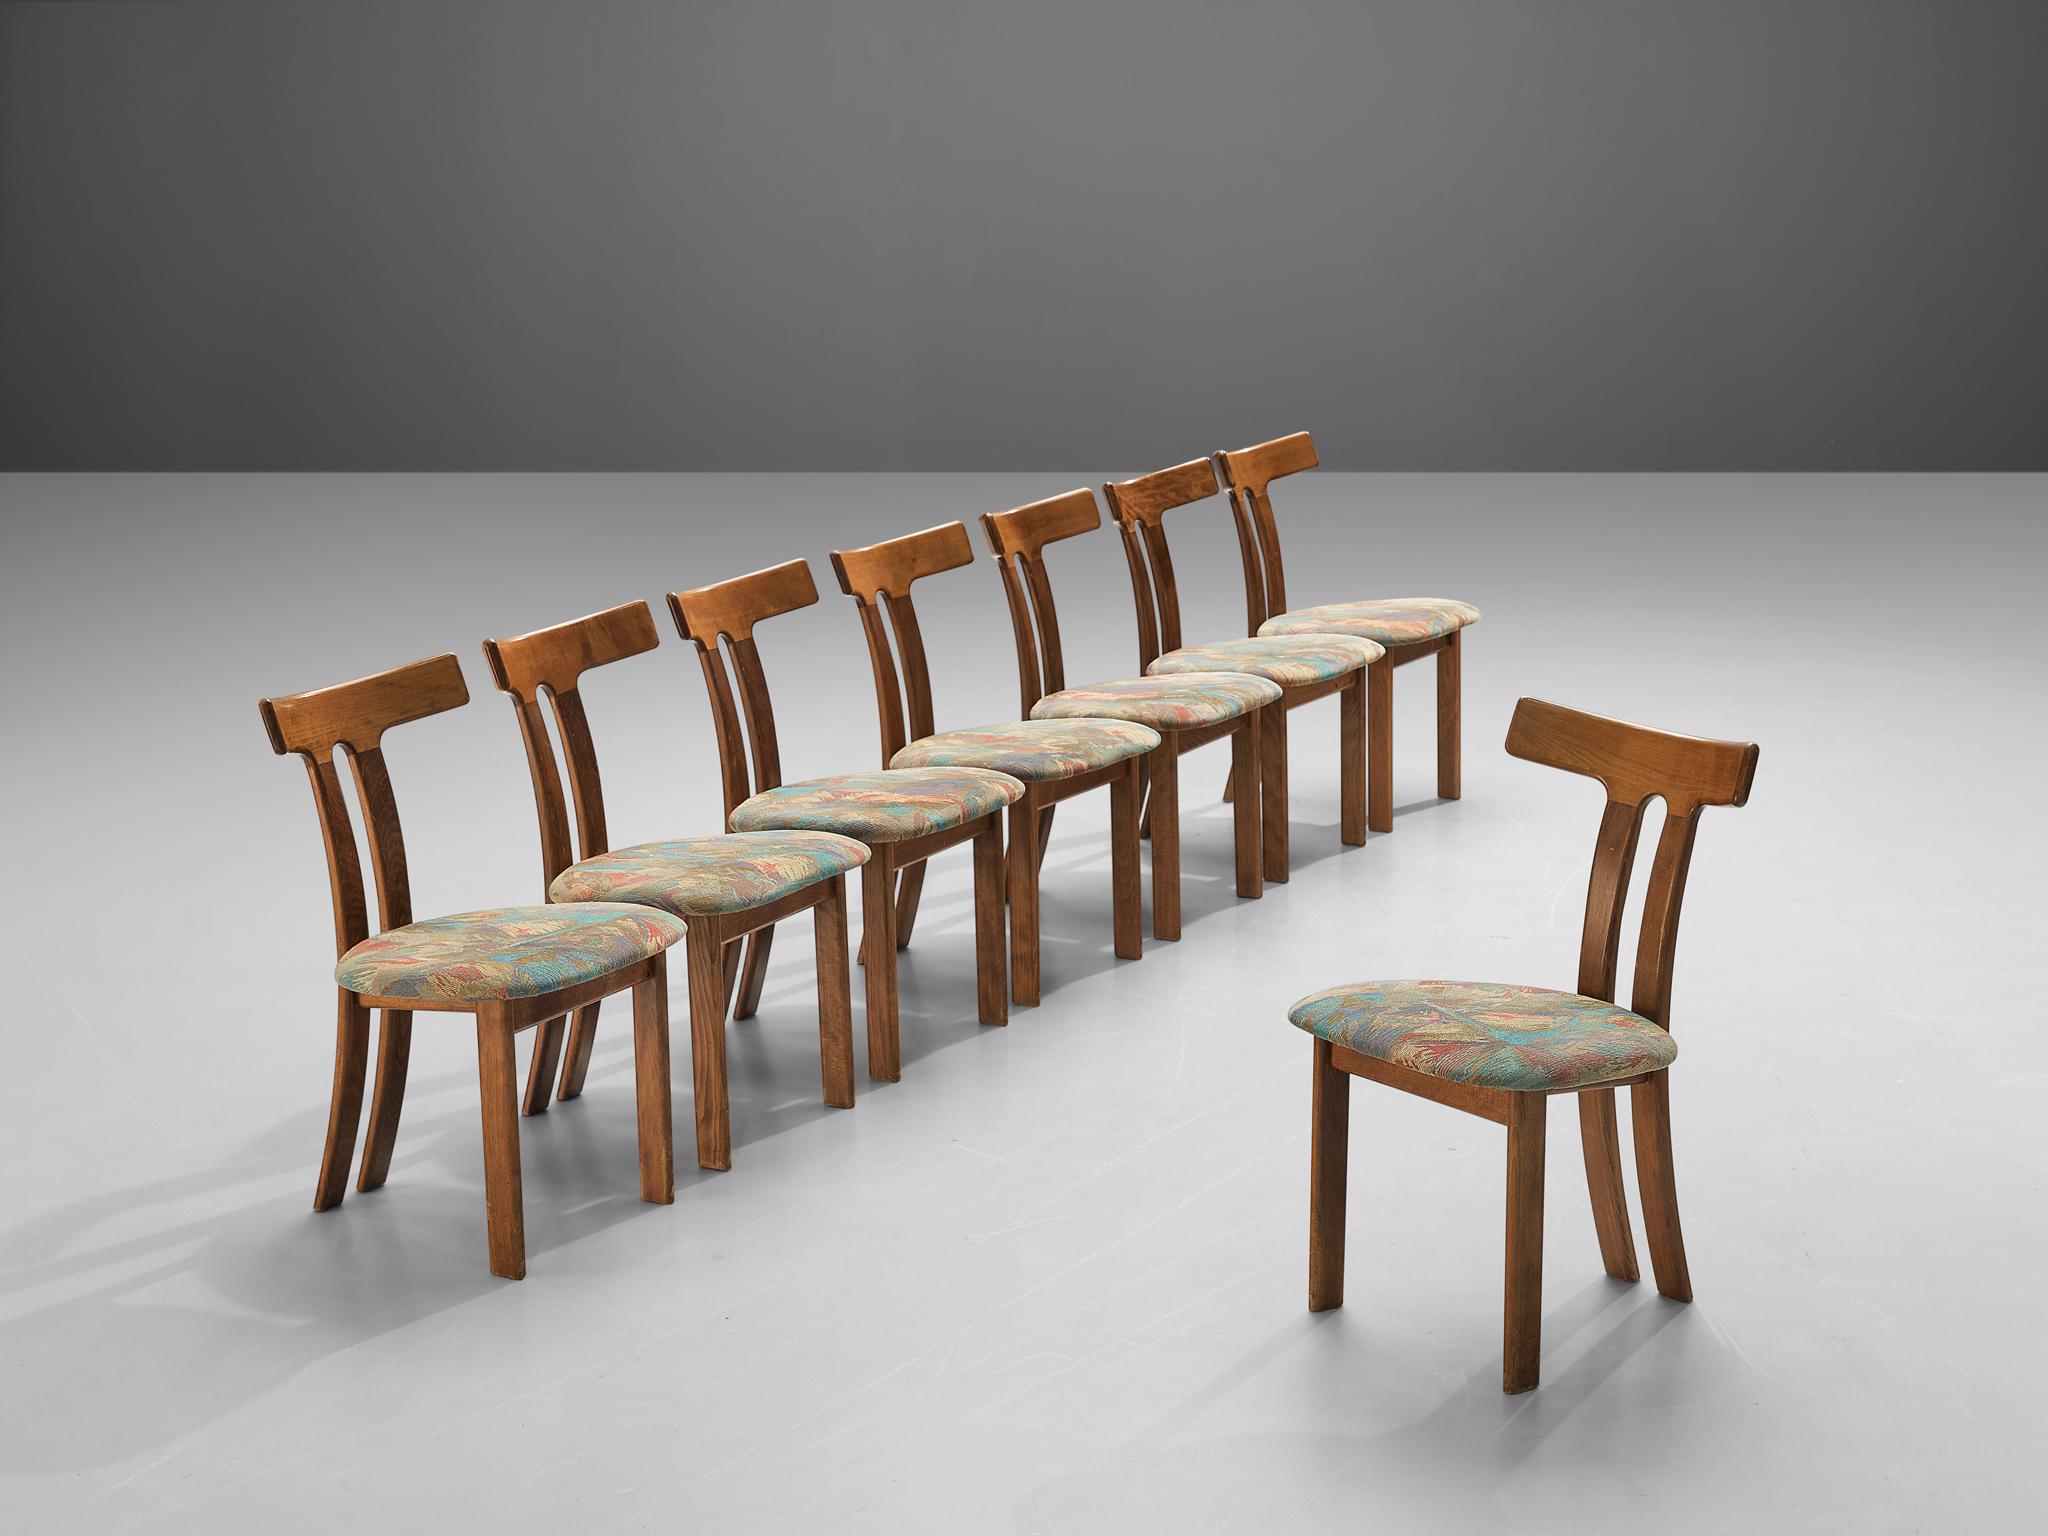 Mid-20th Century Set of 8 Danish Dining Chairs with Organic Wood Frames and Fabric Upholstery